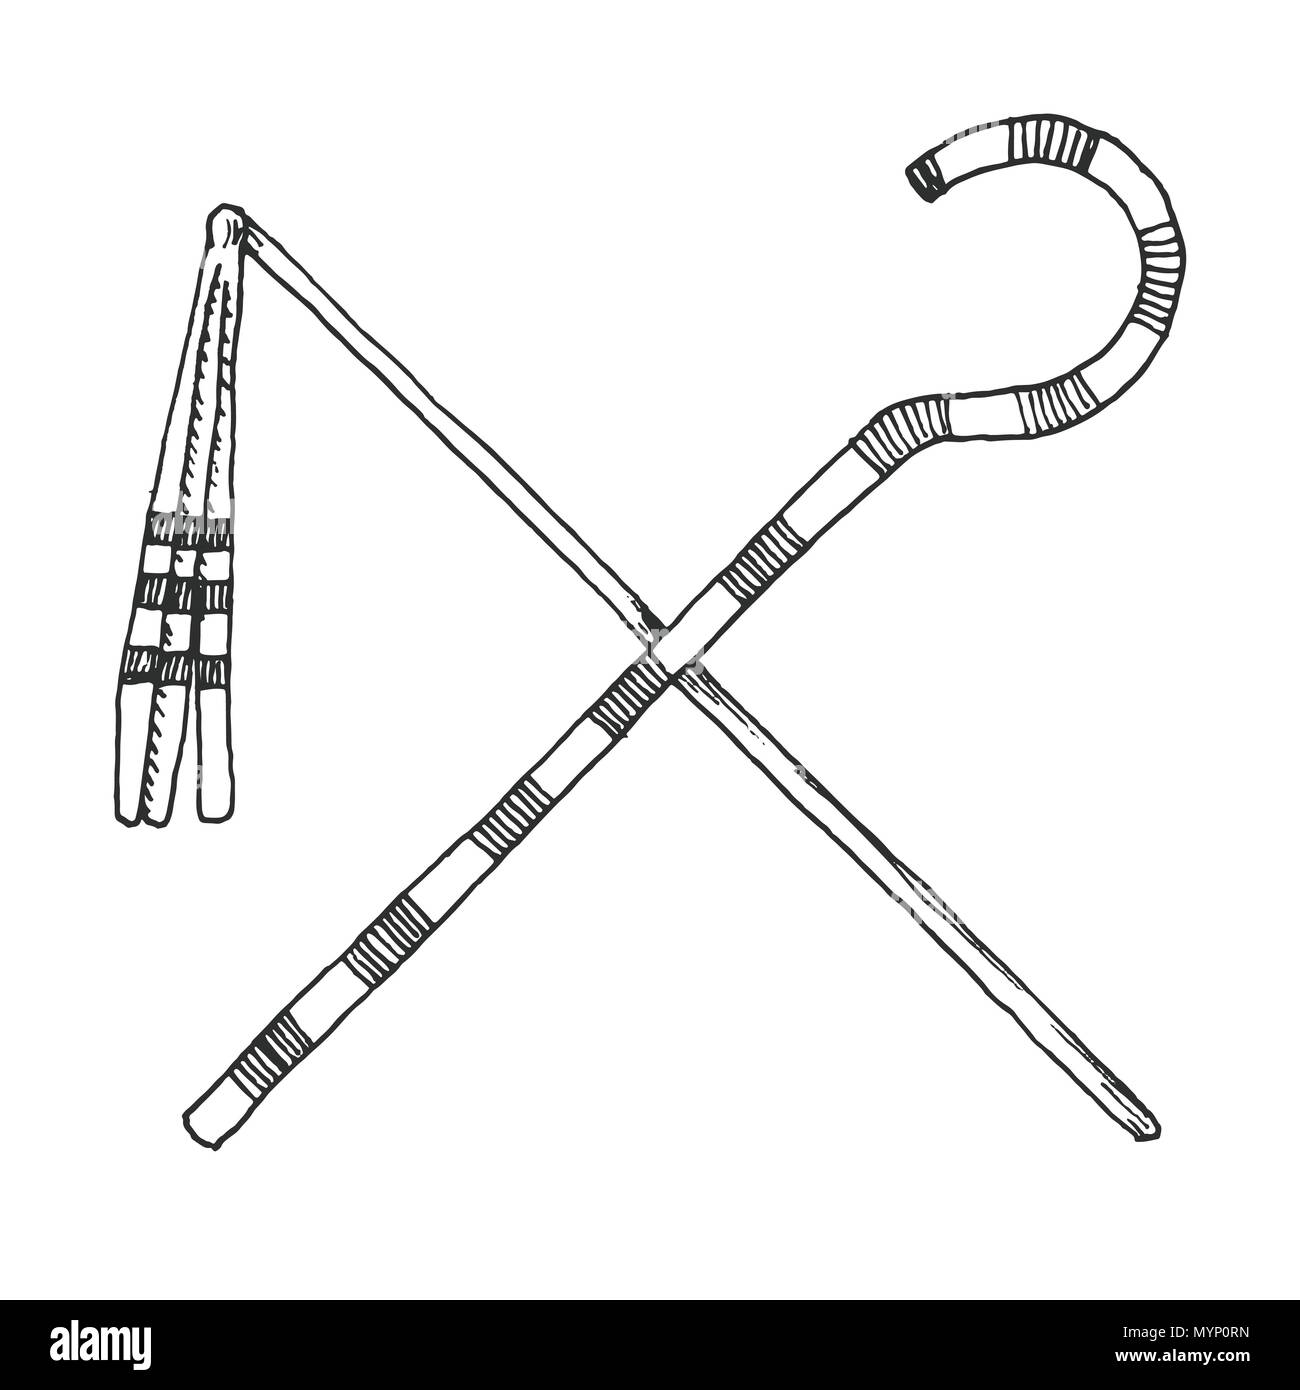 Sketch a Crook And Flail, originally th attributes of the god Osiris that became insignia of pharaonic authority. Stock Vector